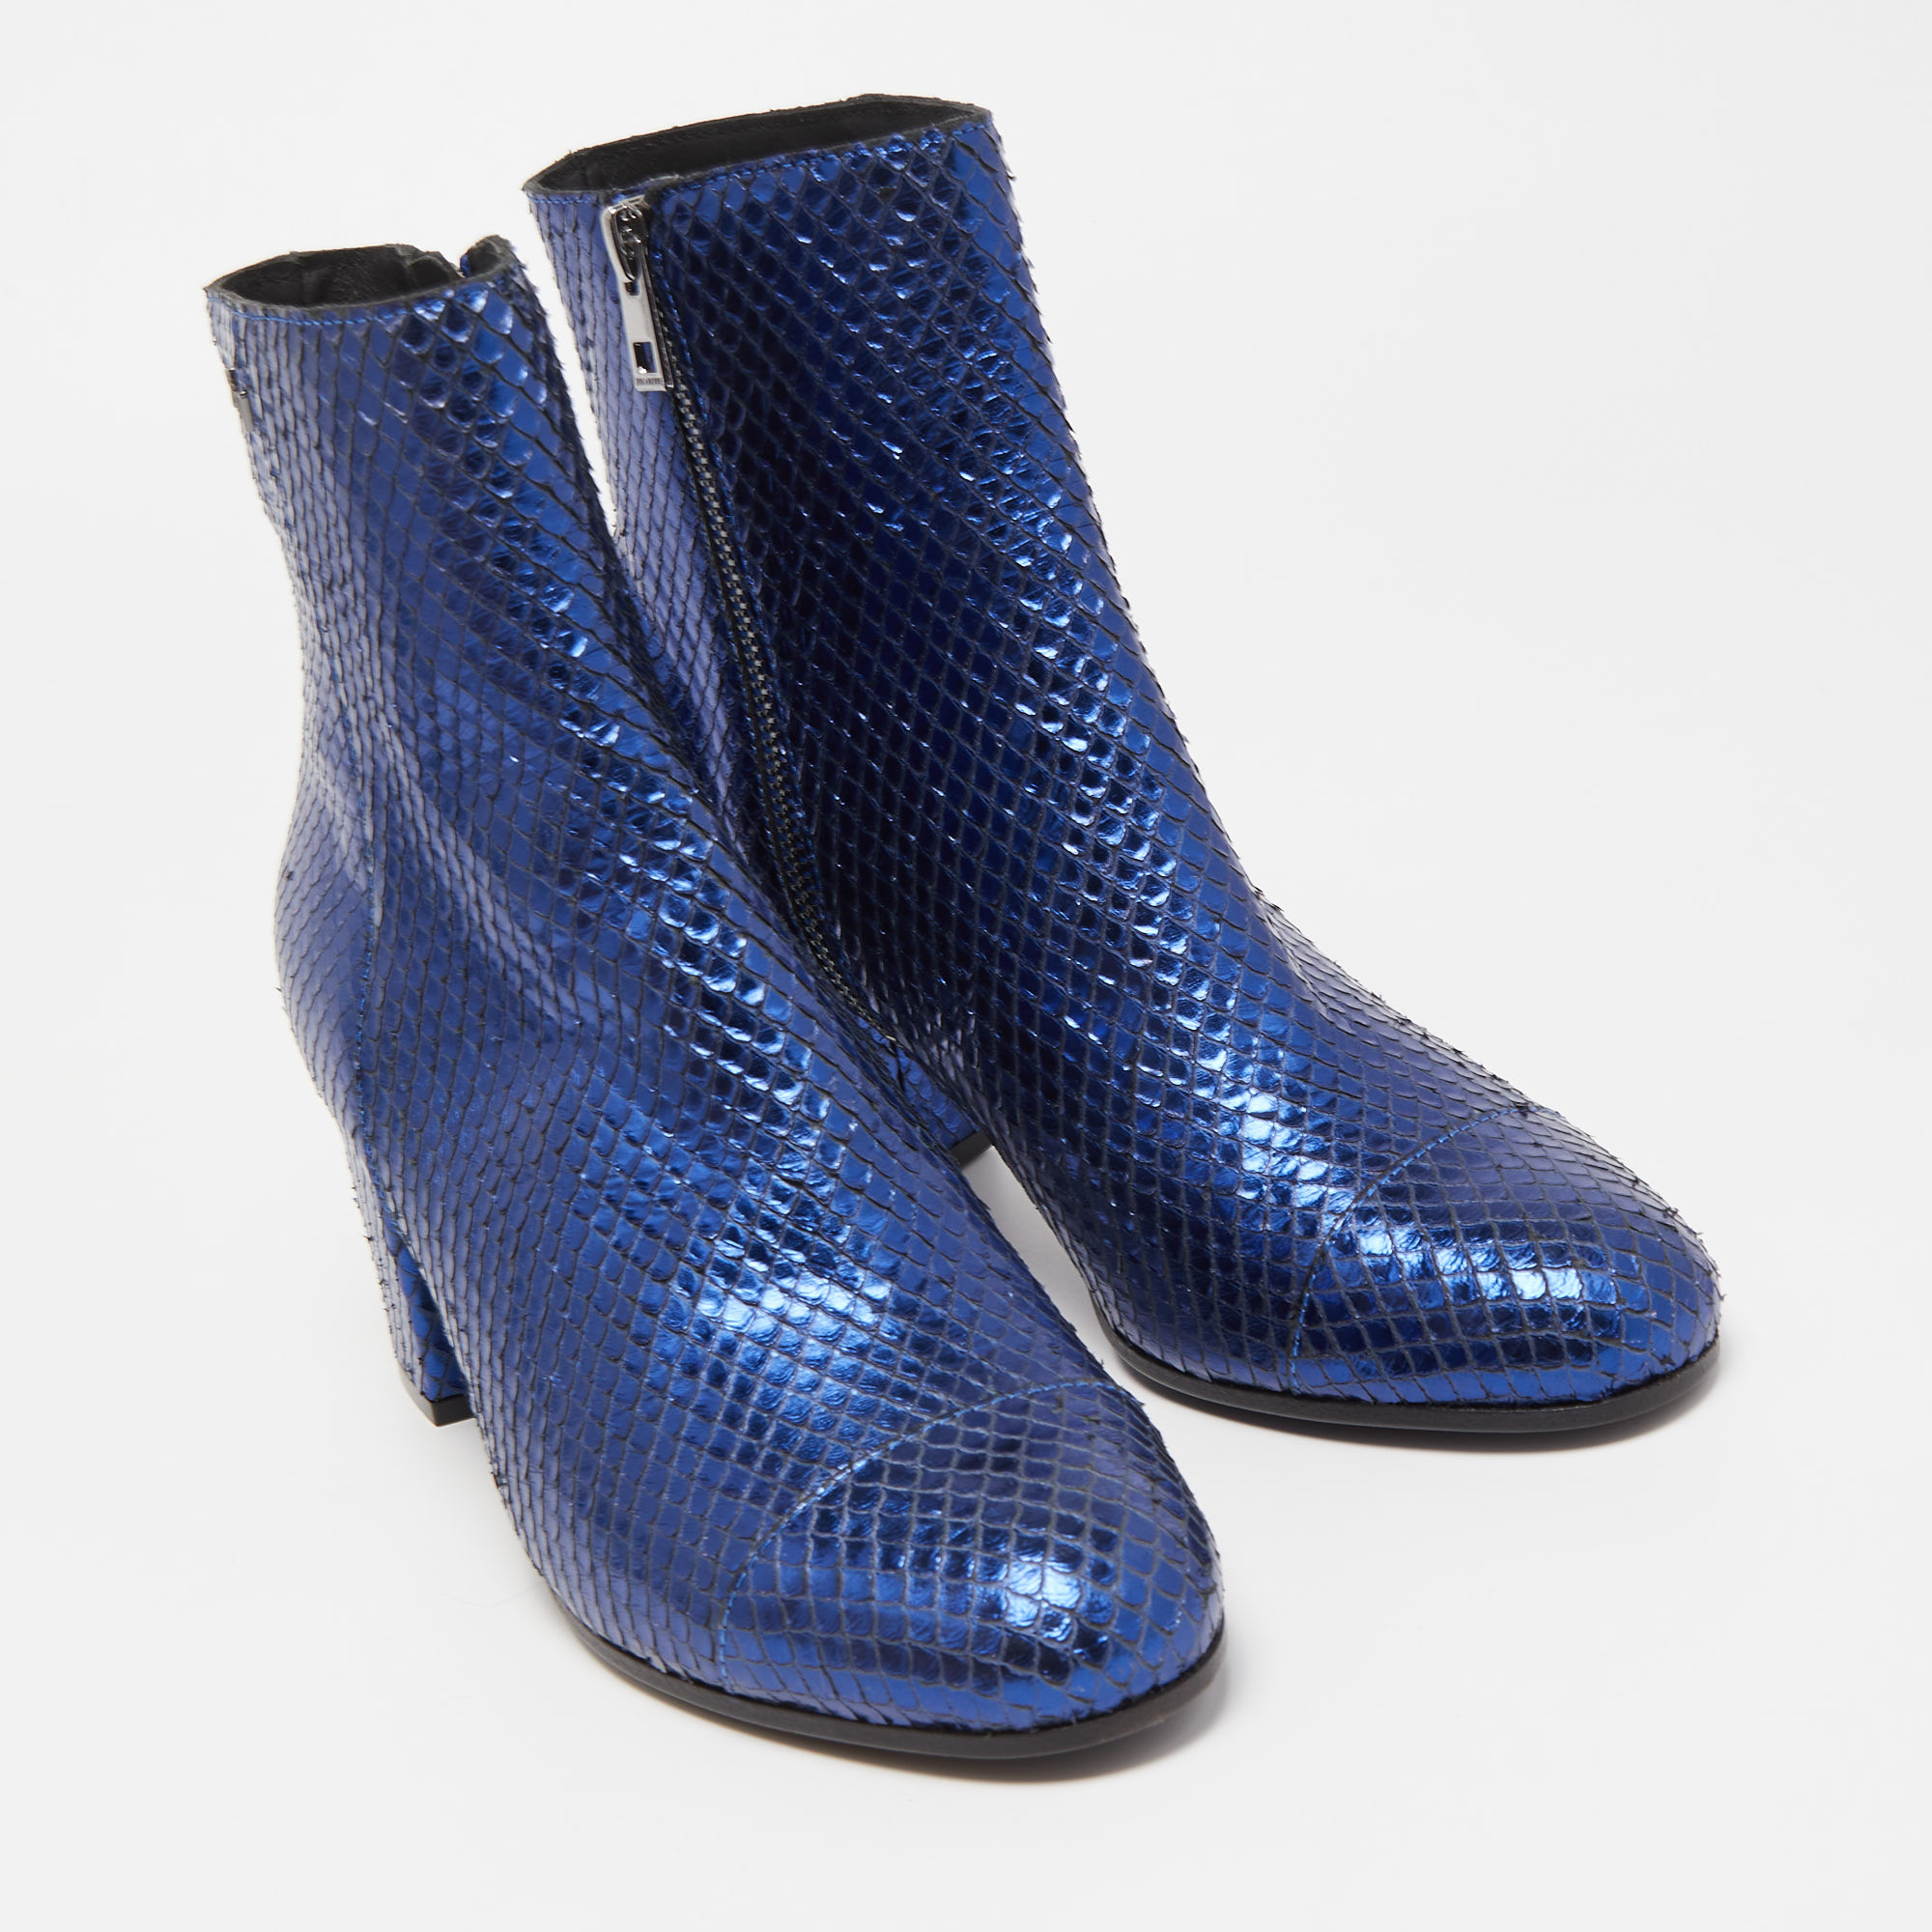 Zadiq & Voltaire Blue Python Embossed Leather Block Heel Ankle Booties Size 37